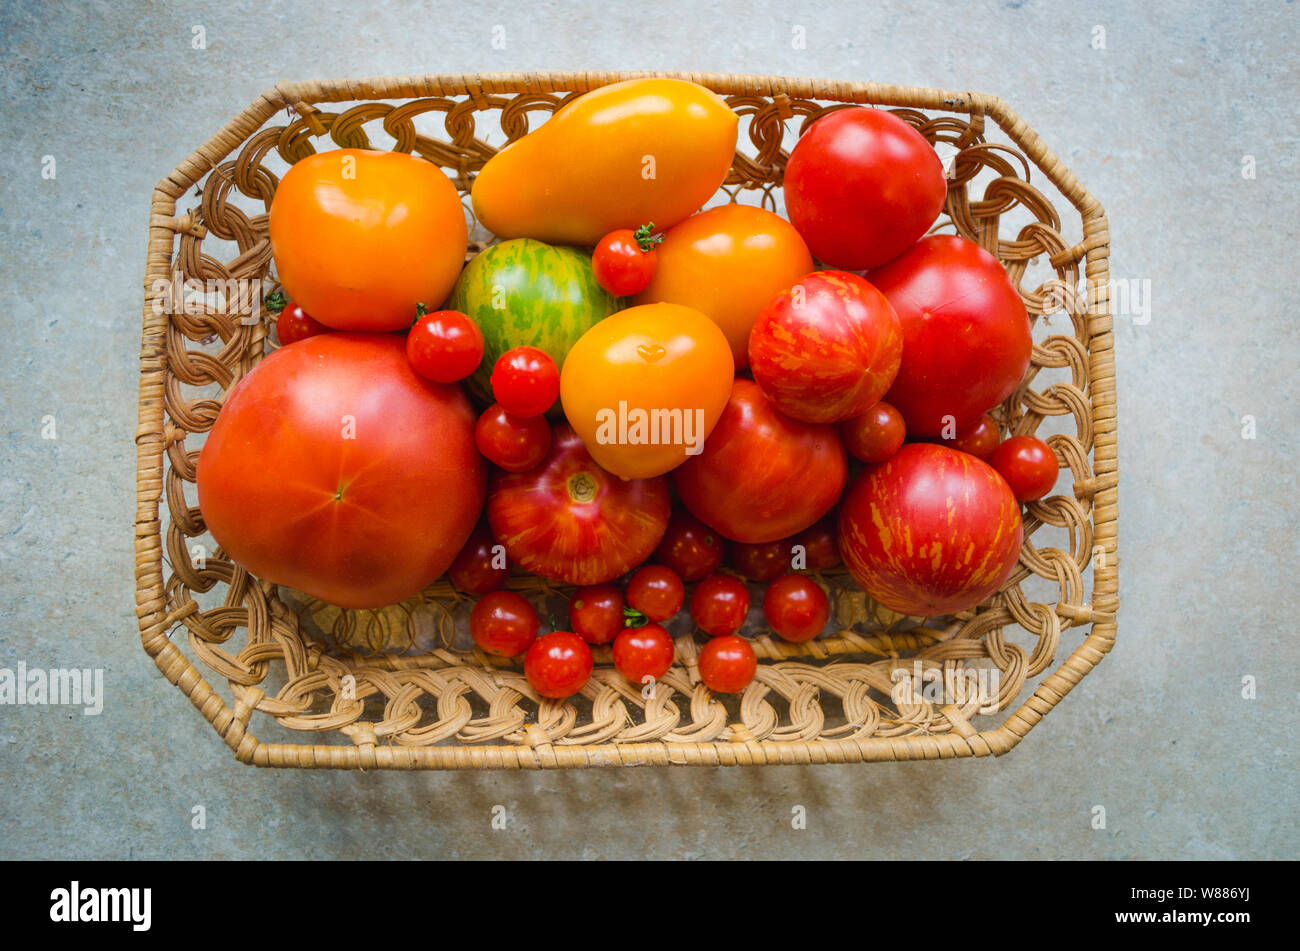 Different types of organic tomatoes in a basket - orange, green, red tomatoes, cherry tomatoes Stock Photo